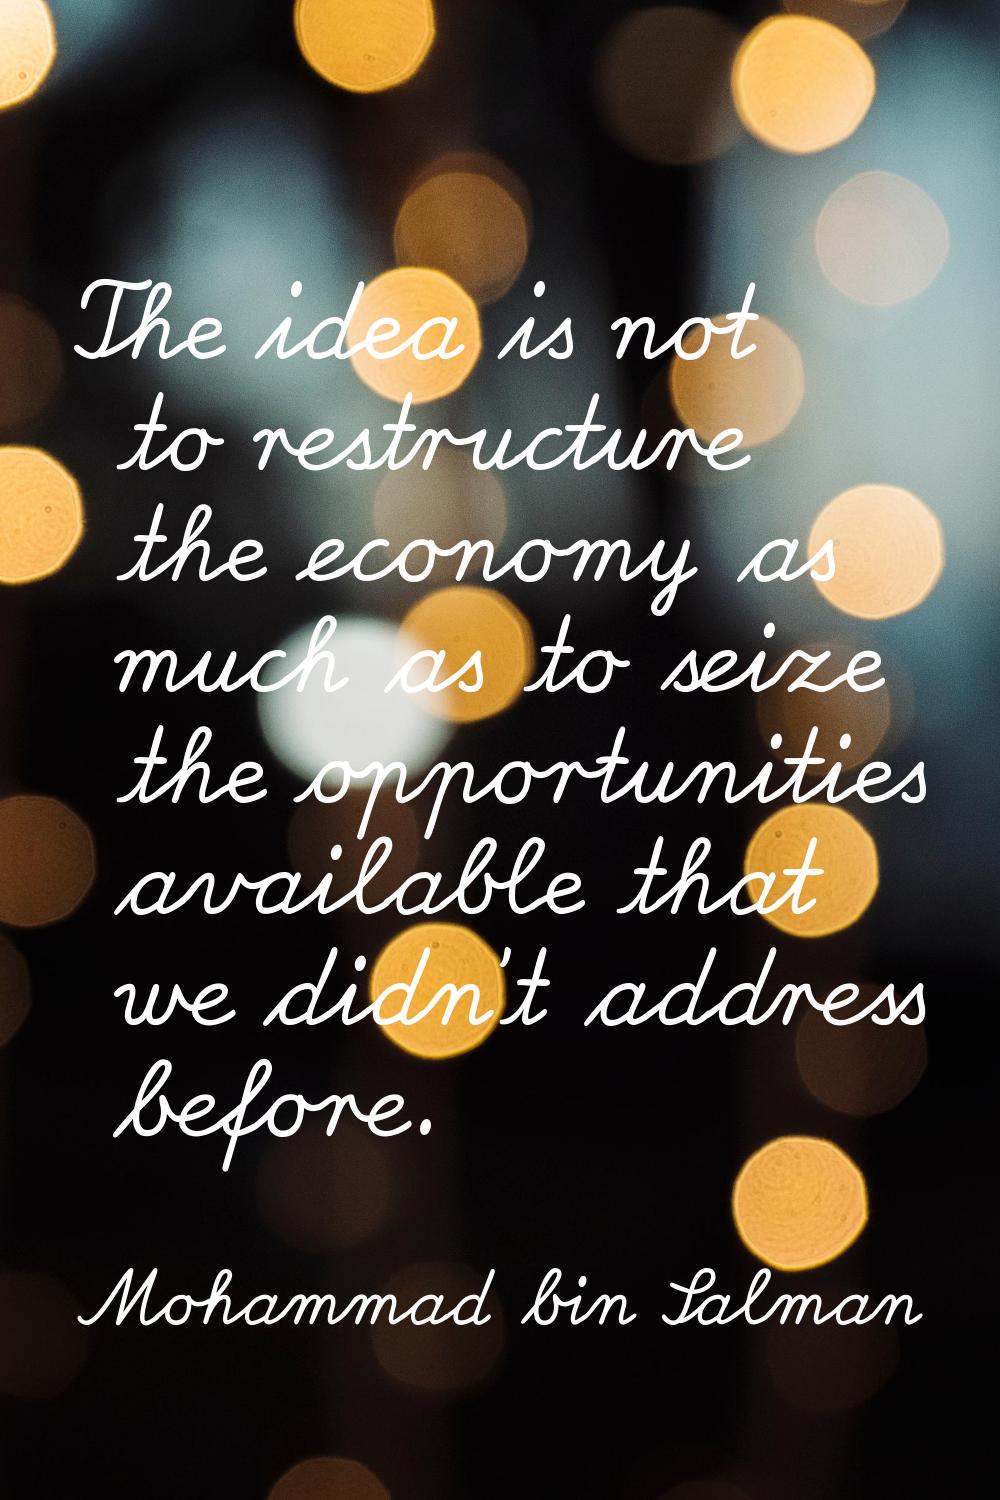 The idea is not to restructure the economy as much as to seize the opportunities available that we 